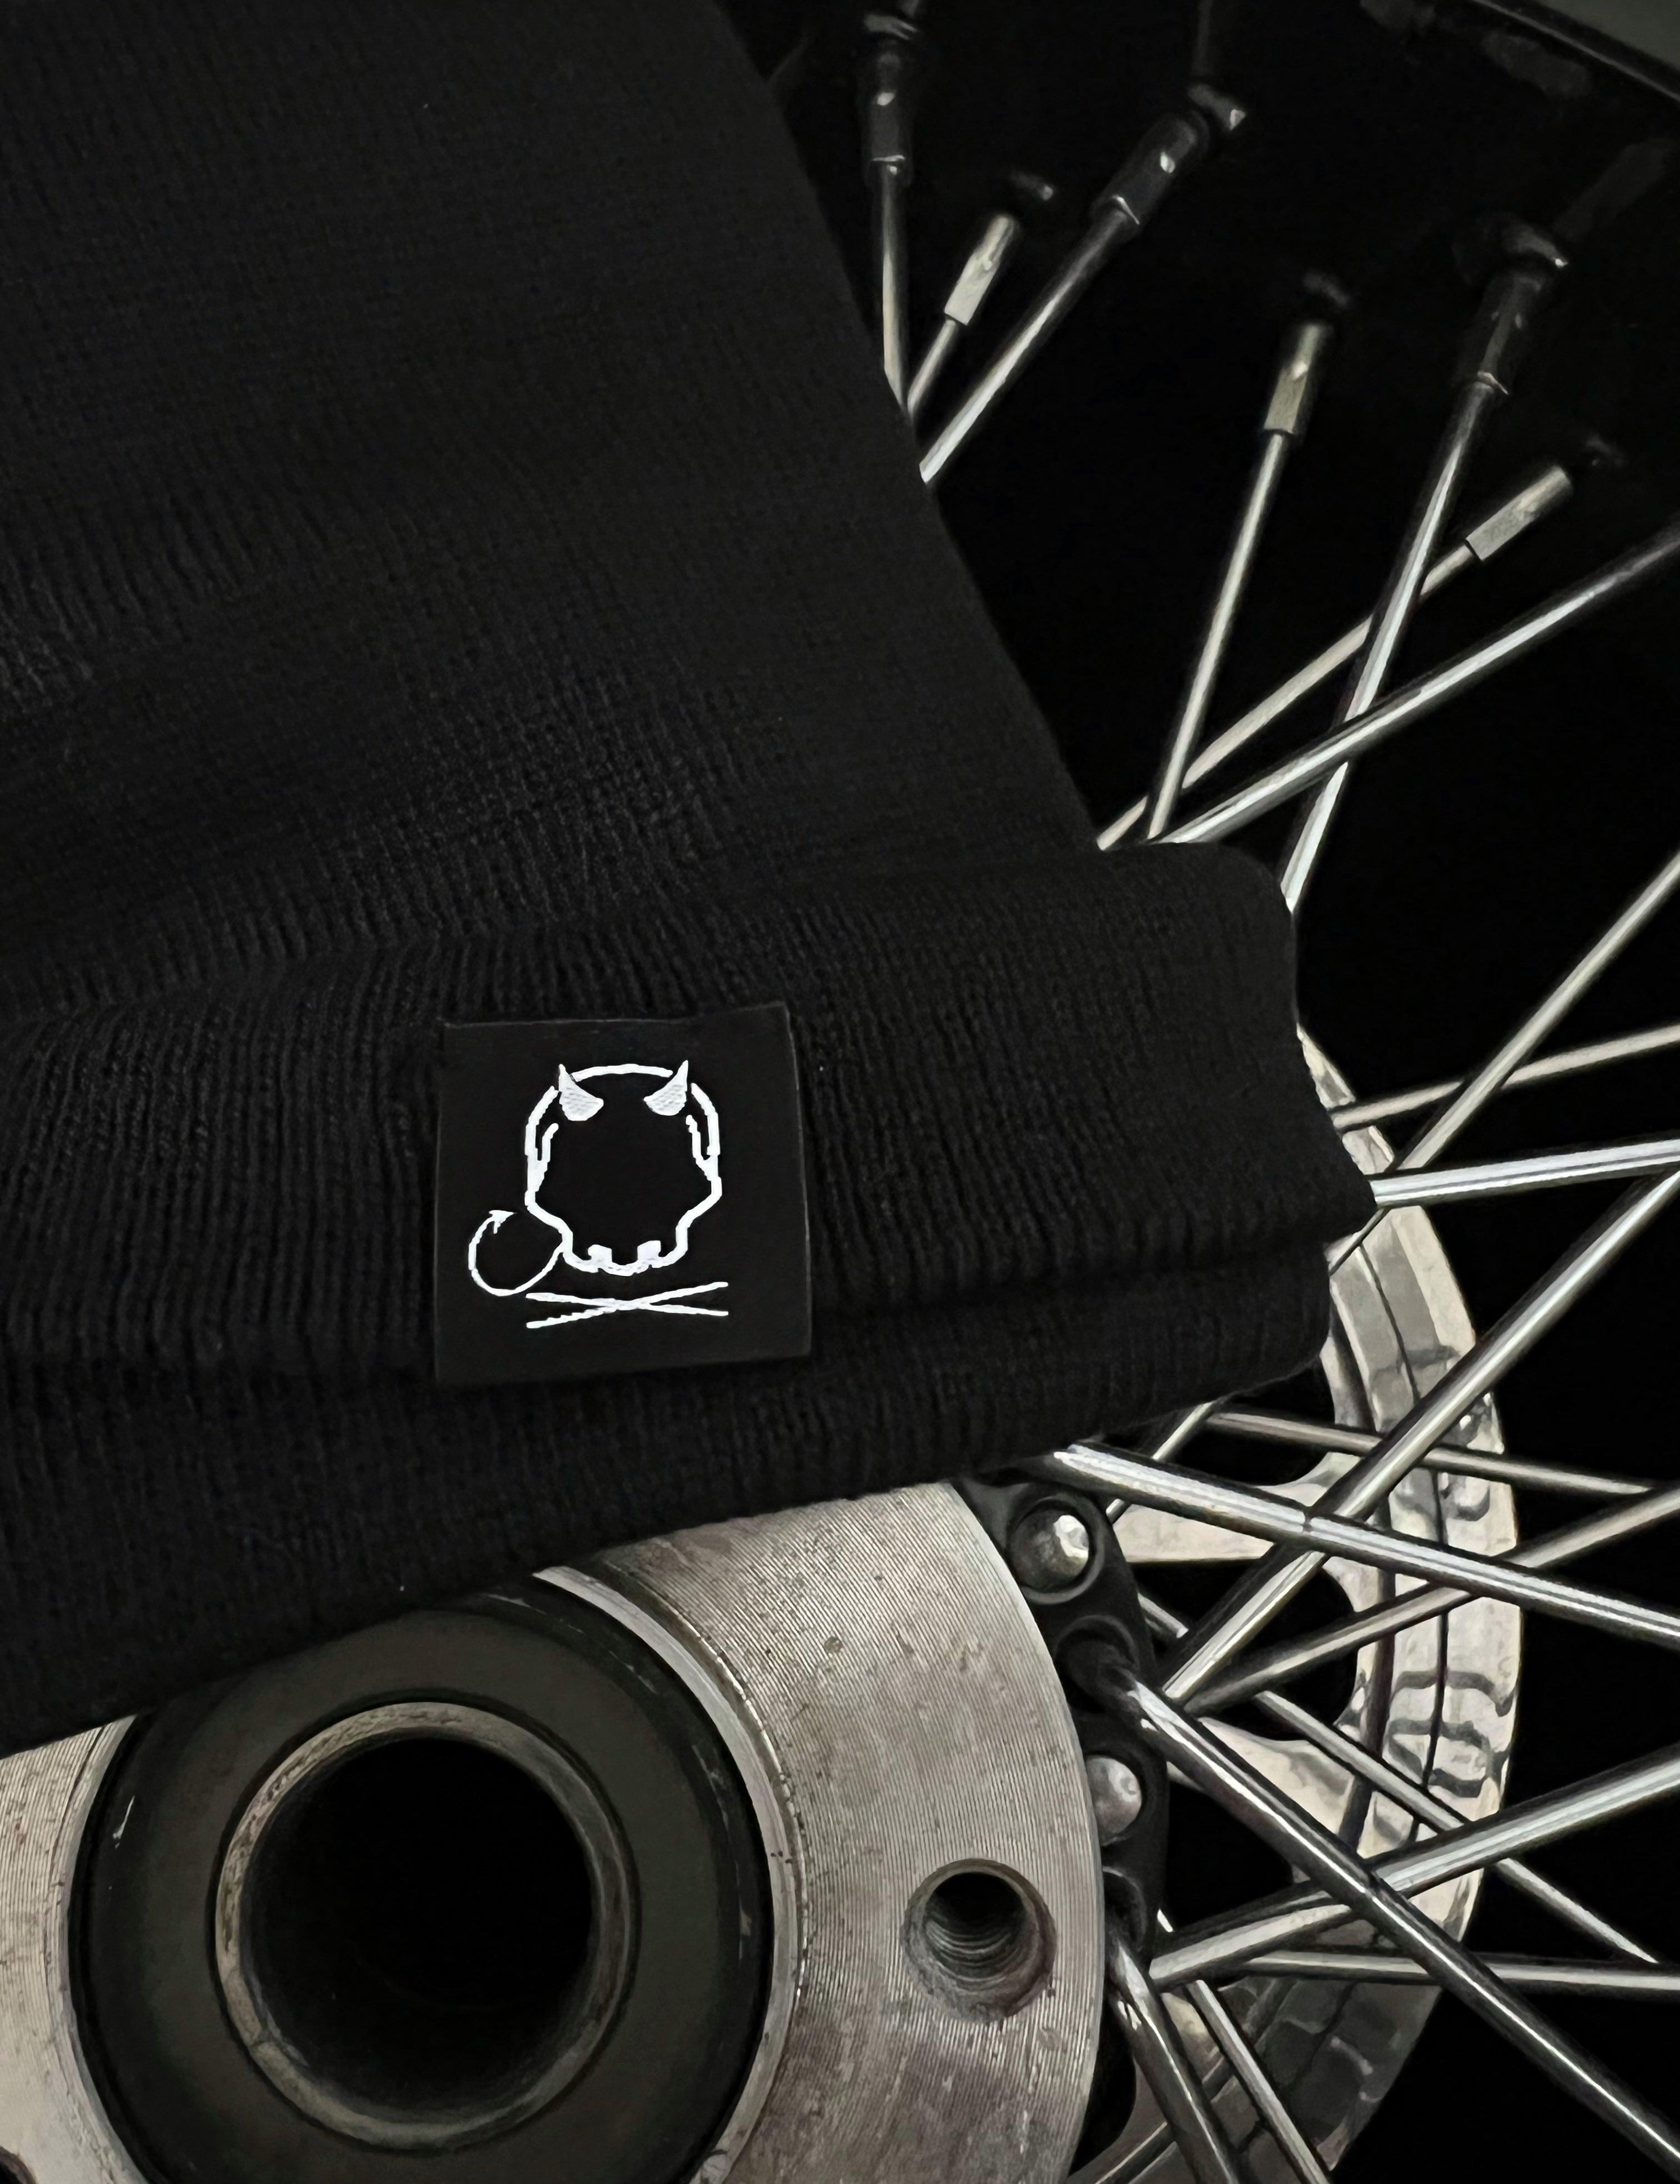 TROUBLE MAKER BLACK BEANIE - The Drive Clothing